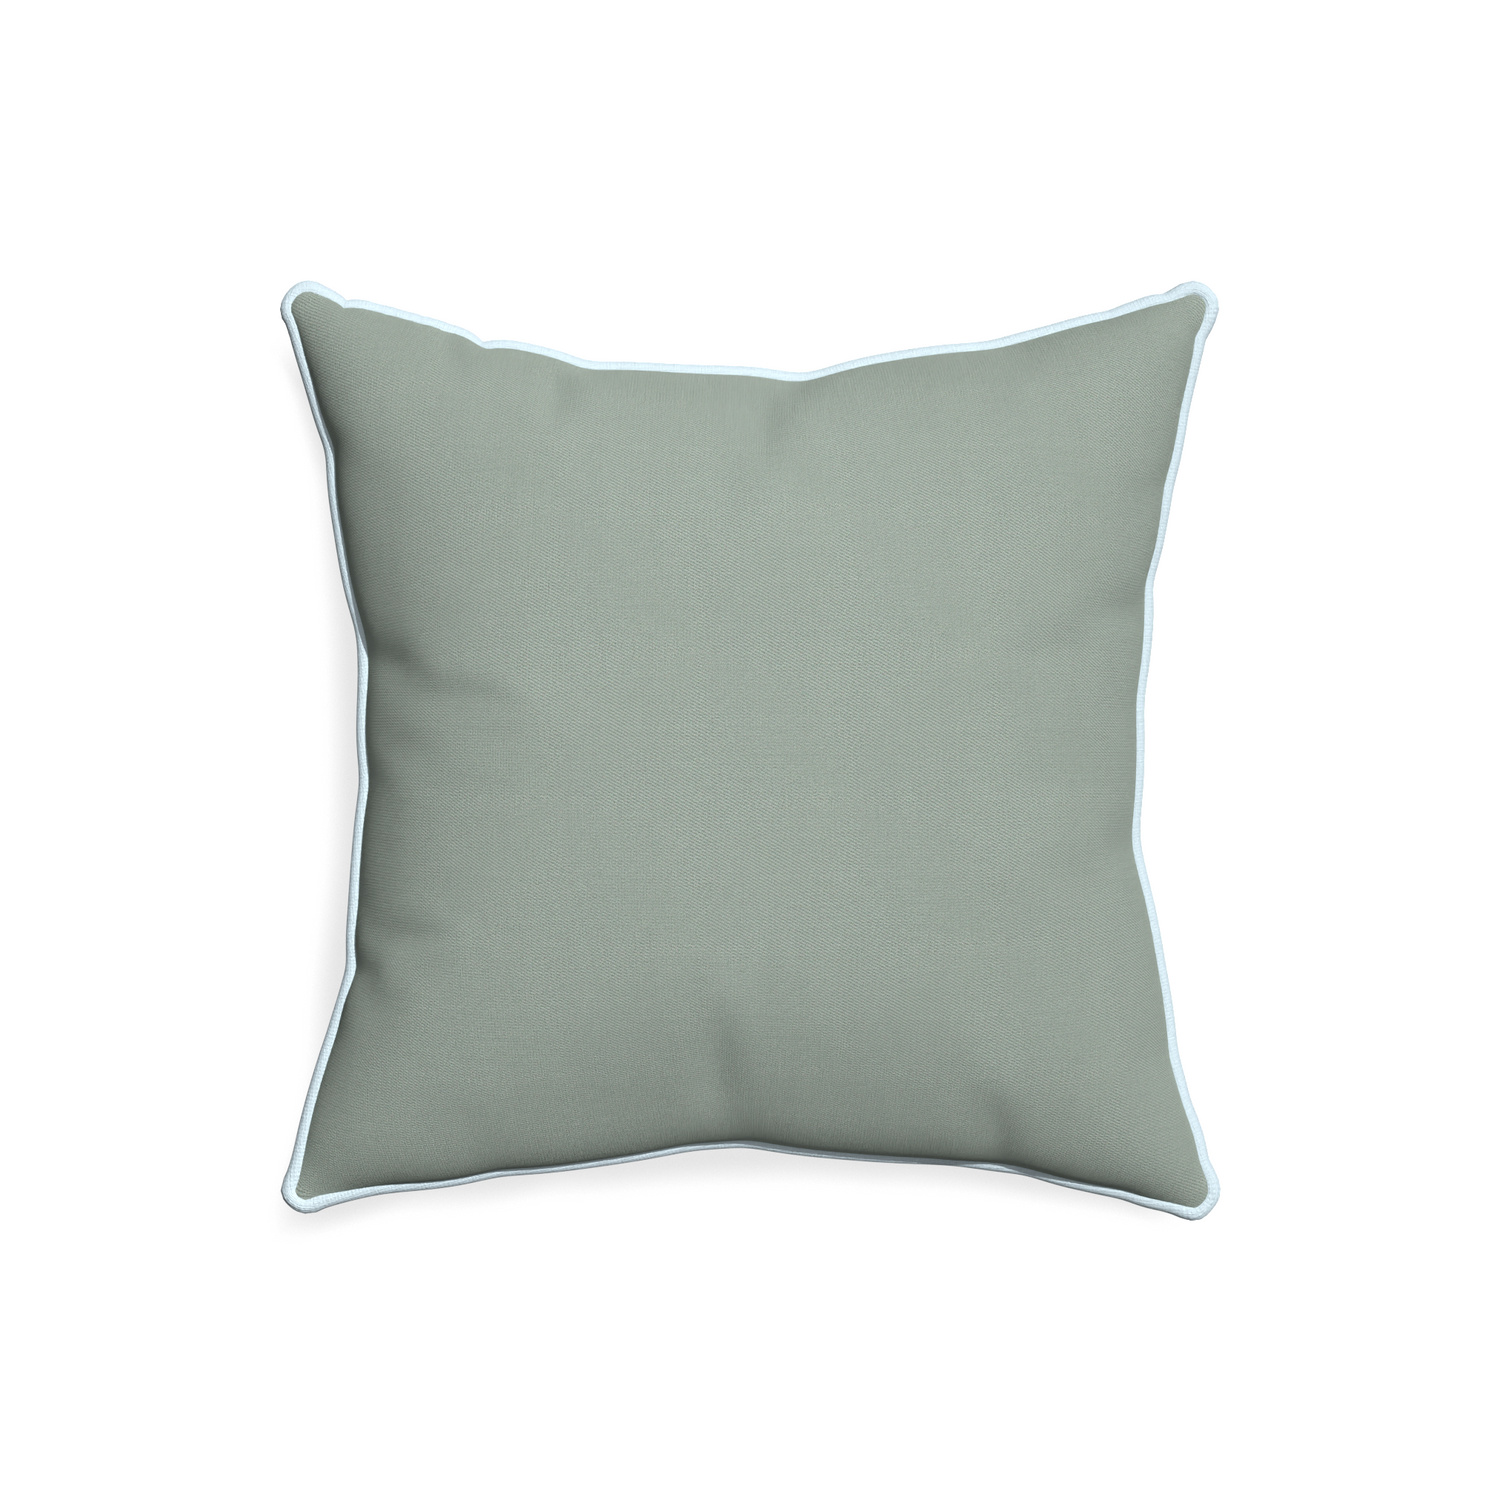 20-square sage custom sage green cottonpillow with powder piping on white background